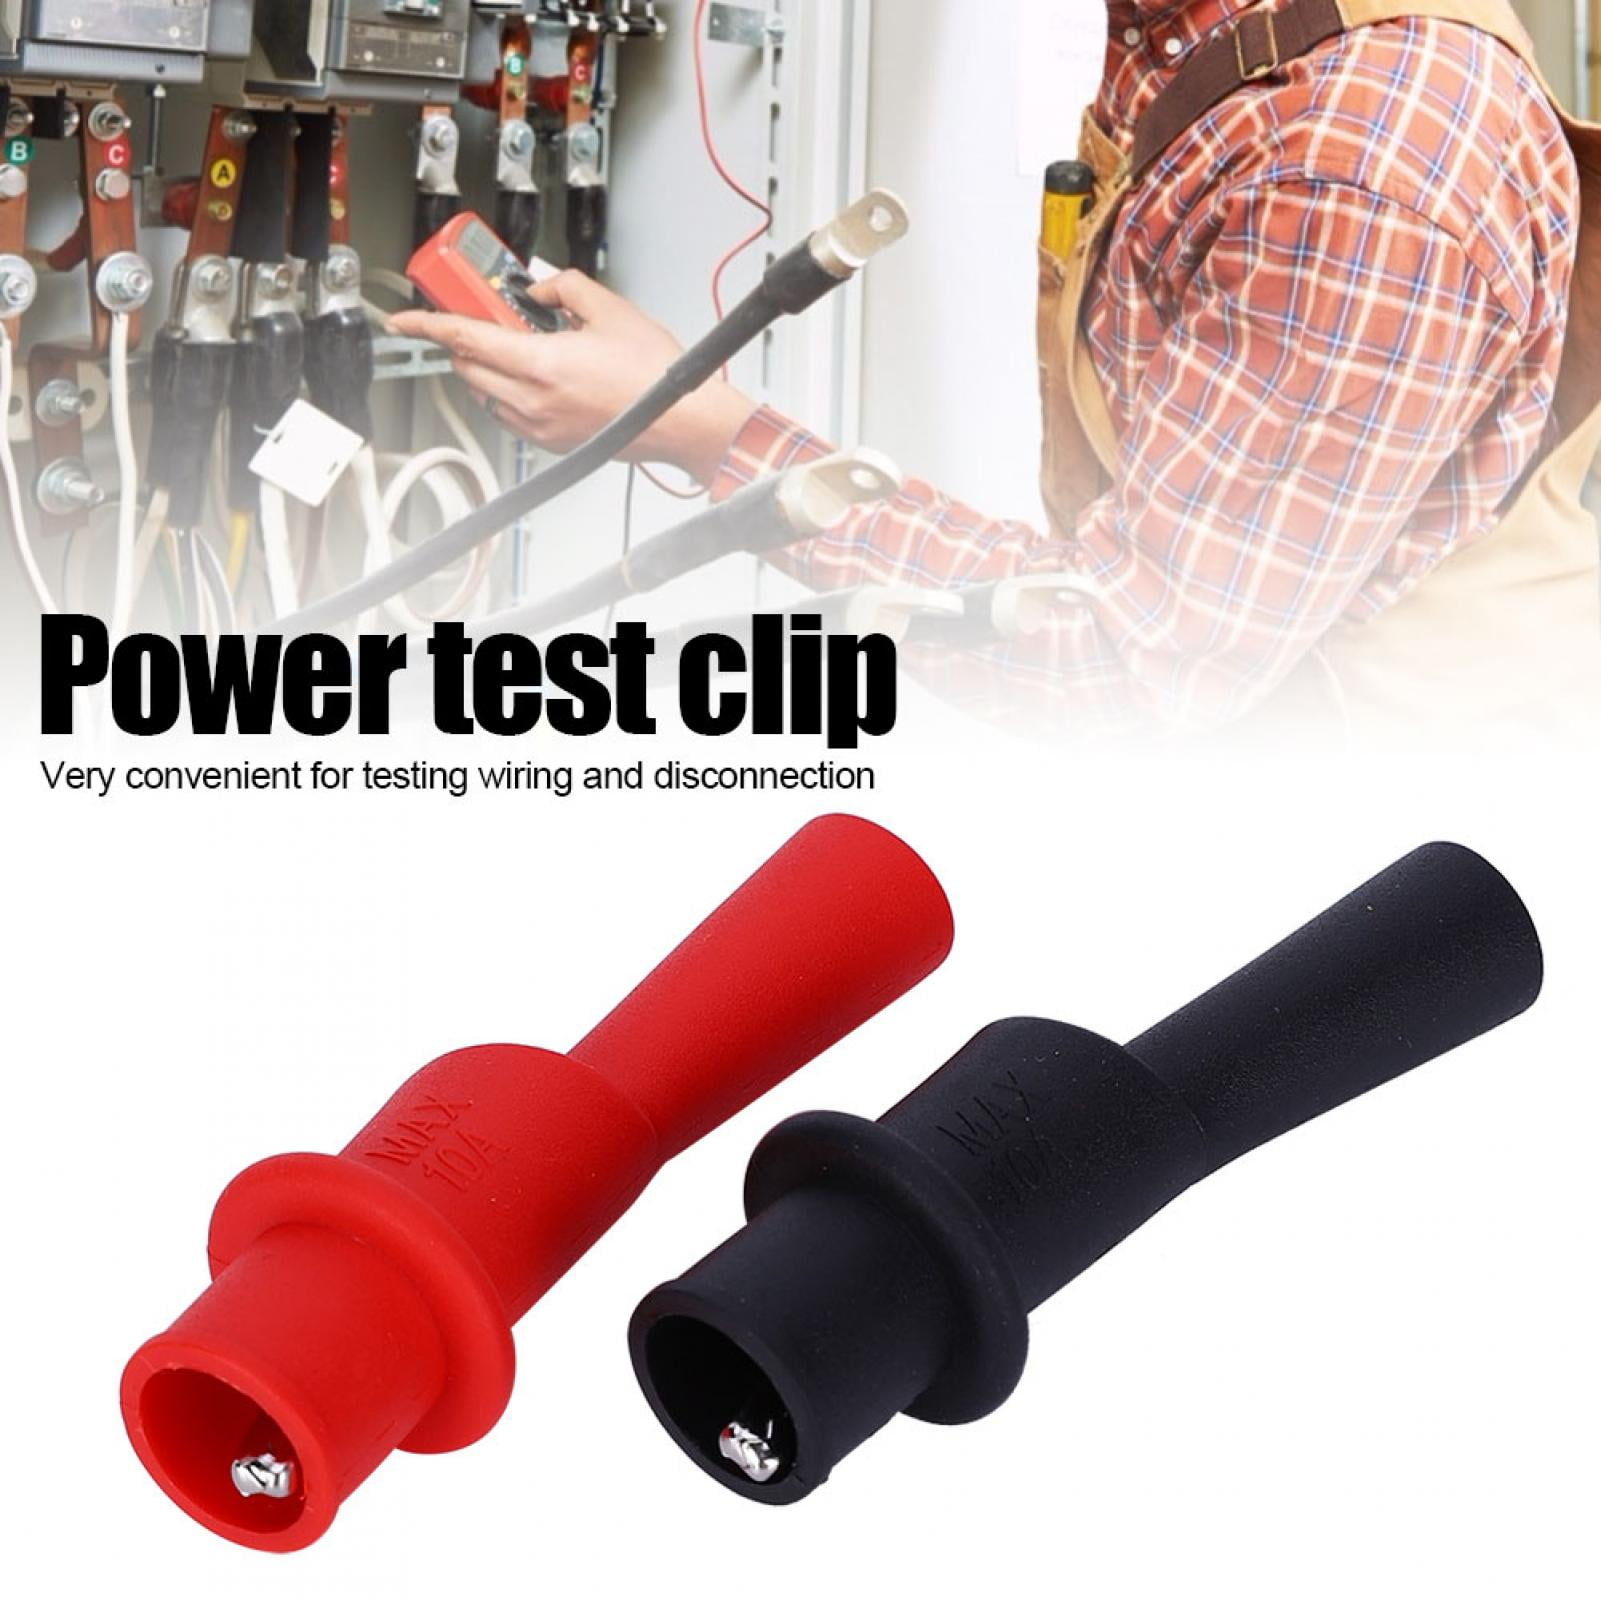 Test Clip Electronics Test Clip Tester Clamp High Sensitivity Low Frequency Testing Clip PCB Electronics Tester Clip for Testing Wiring/Disconnection 